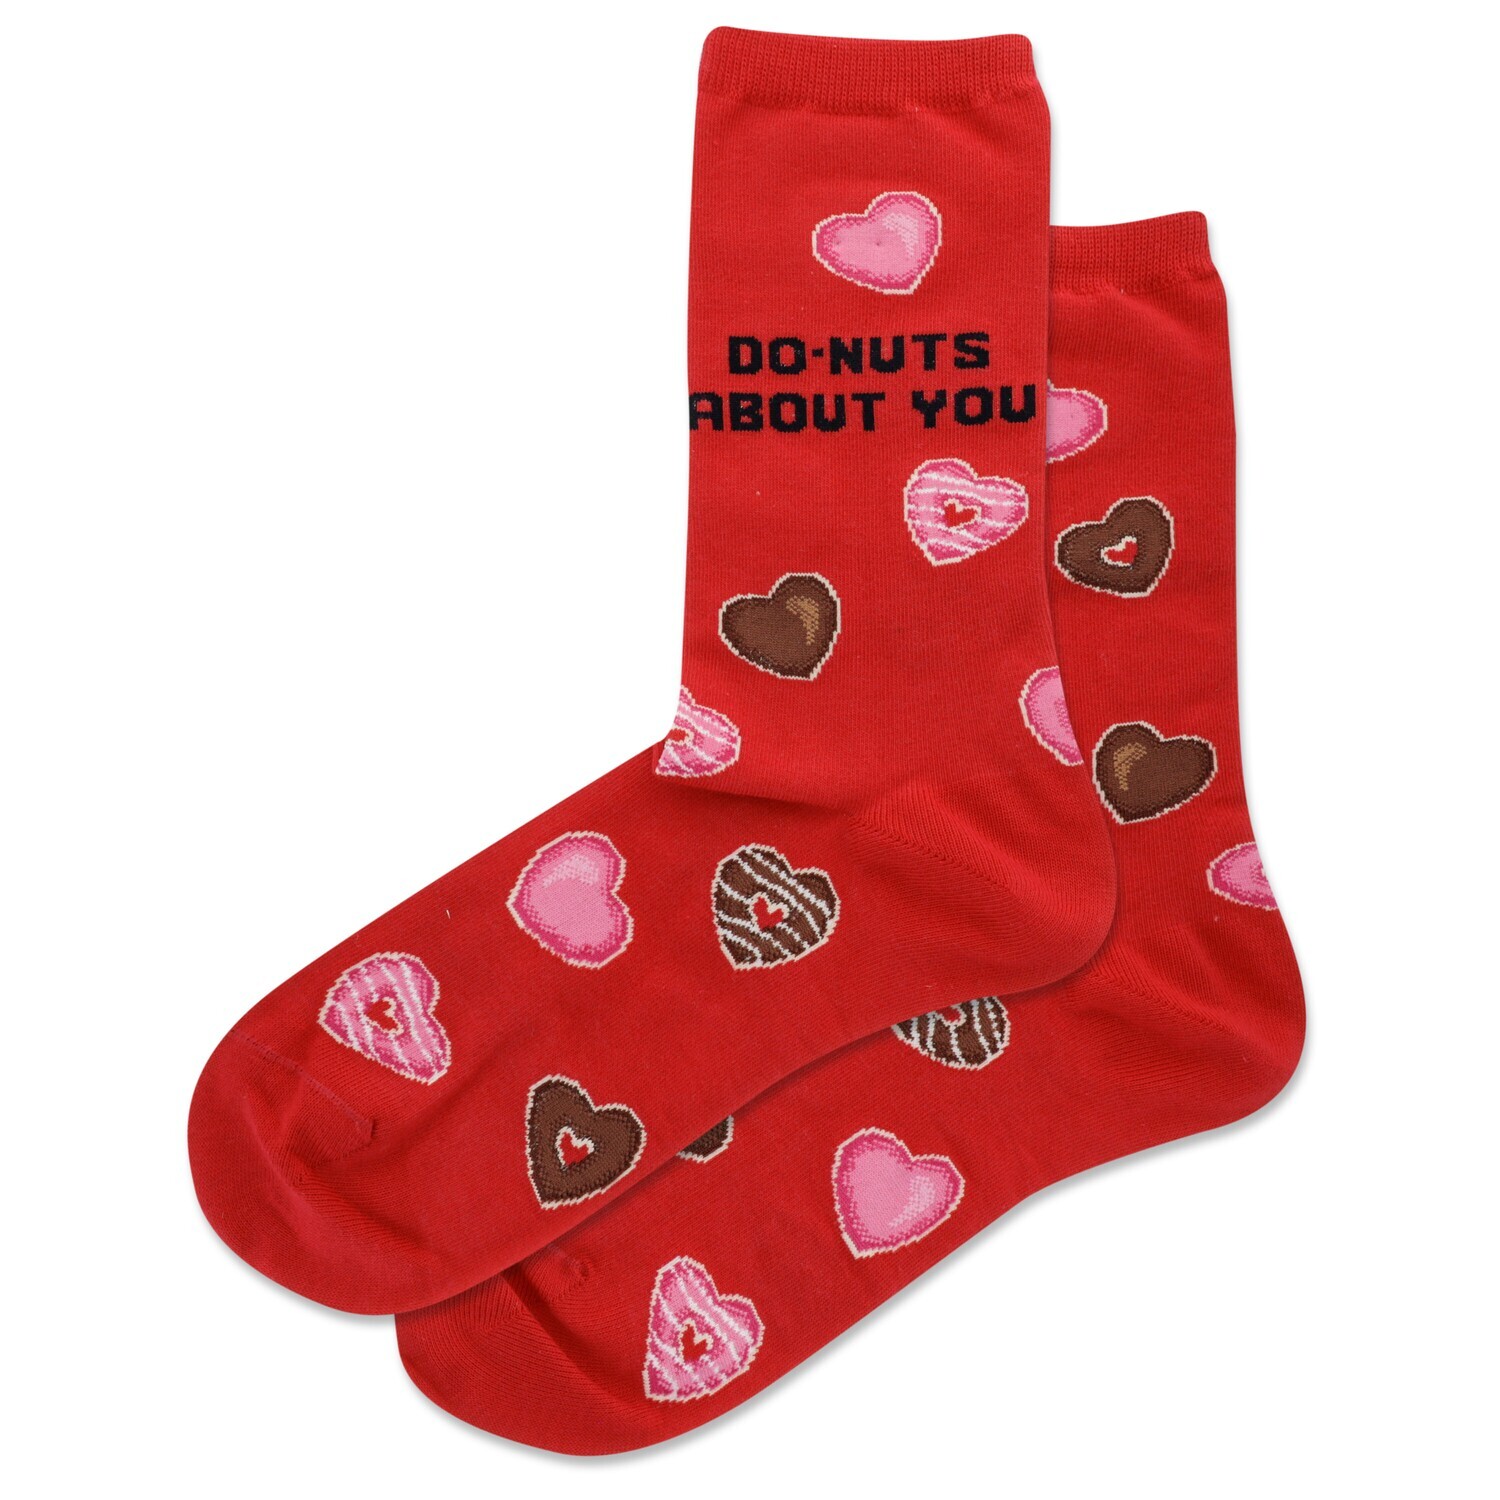 Do-NUTS About You Women's Crew